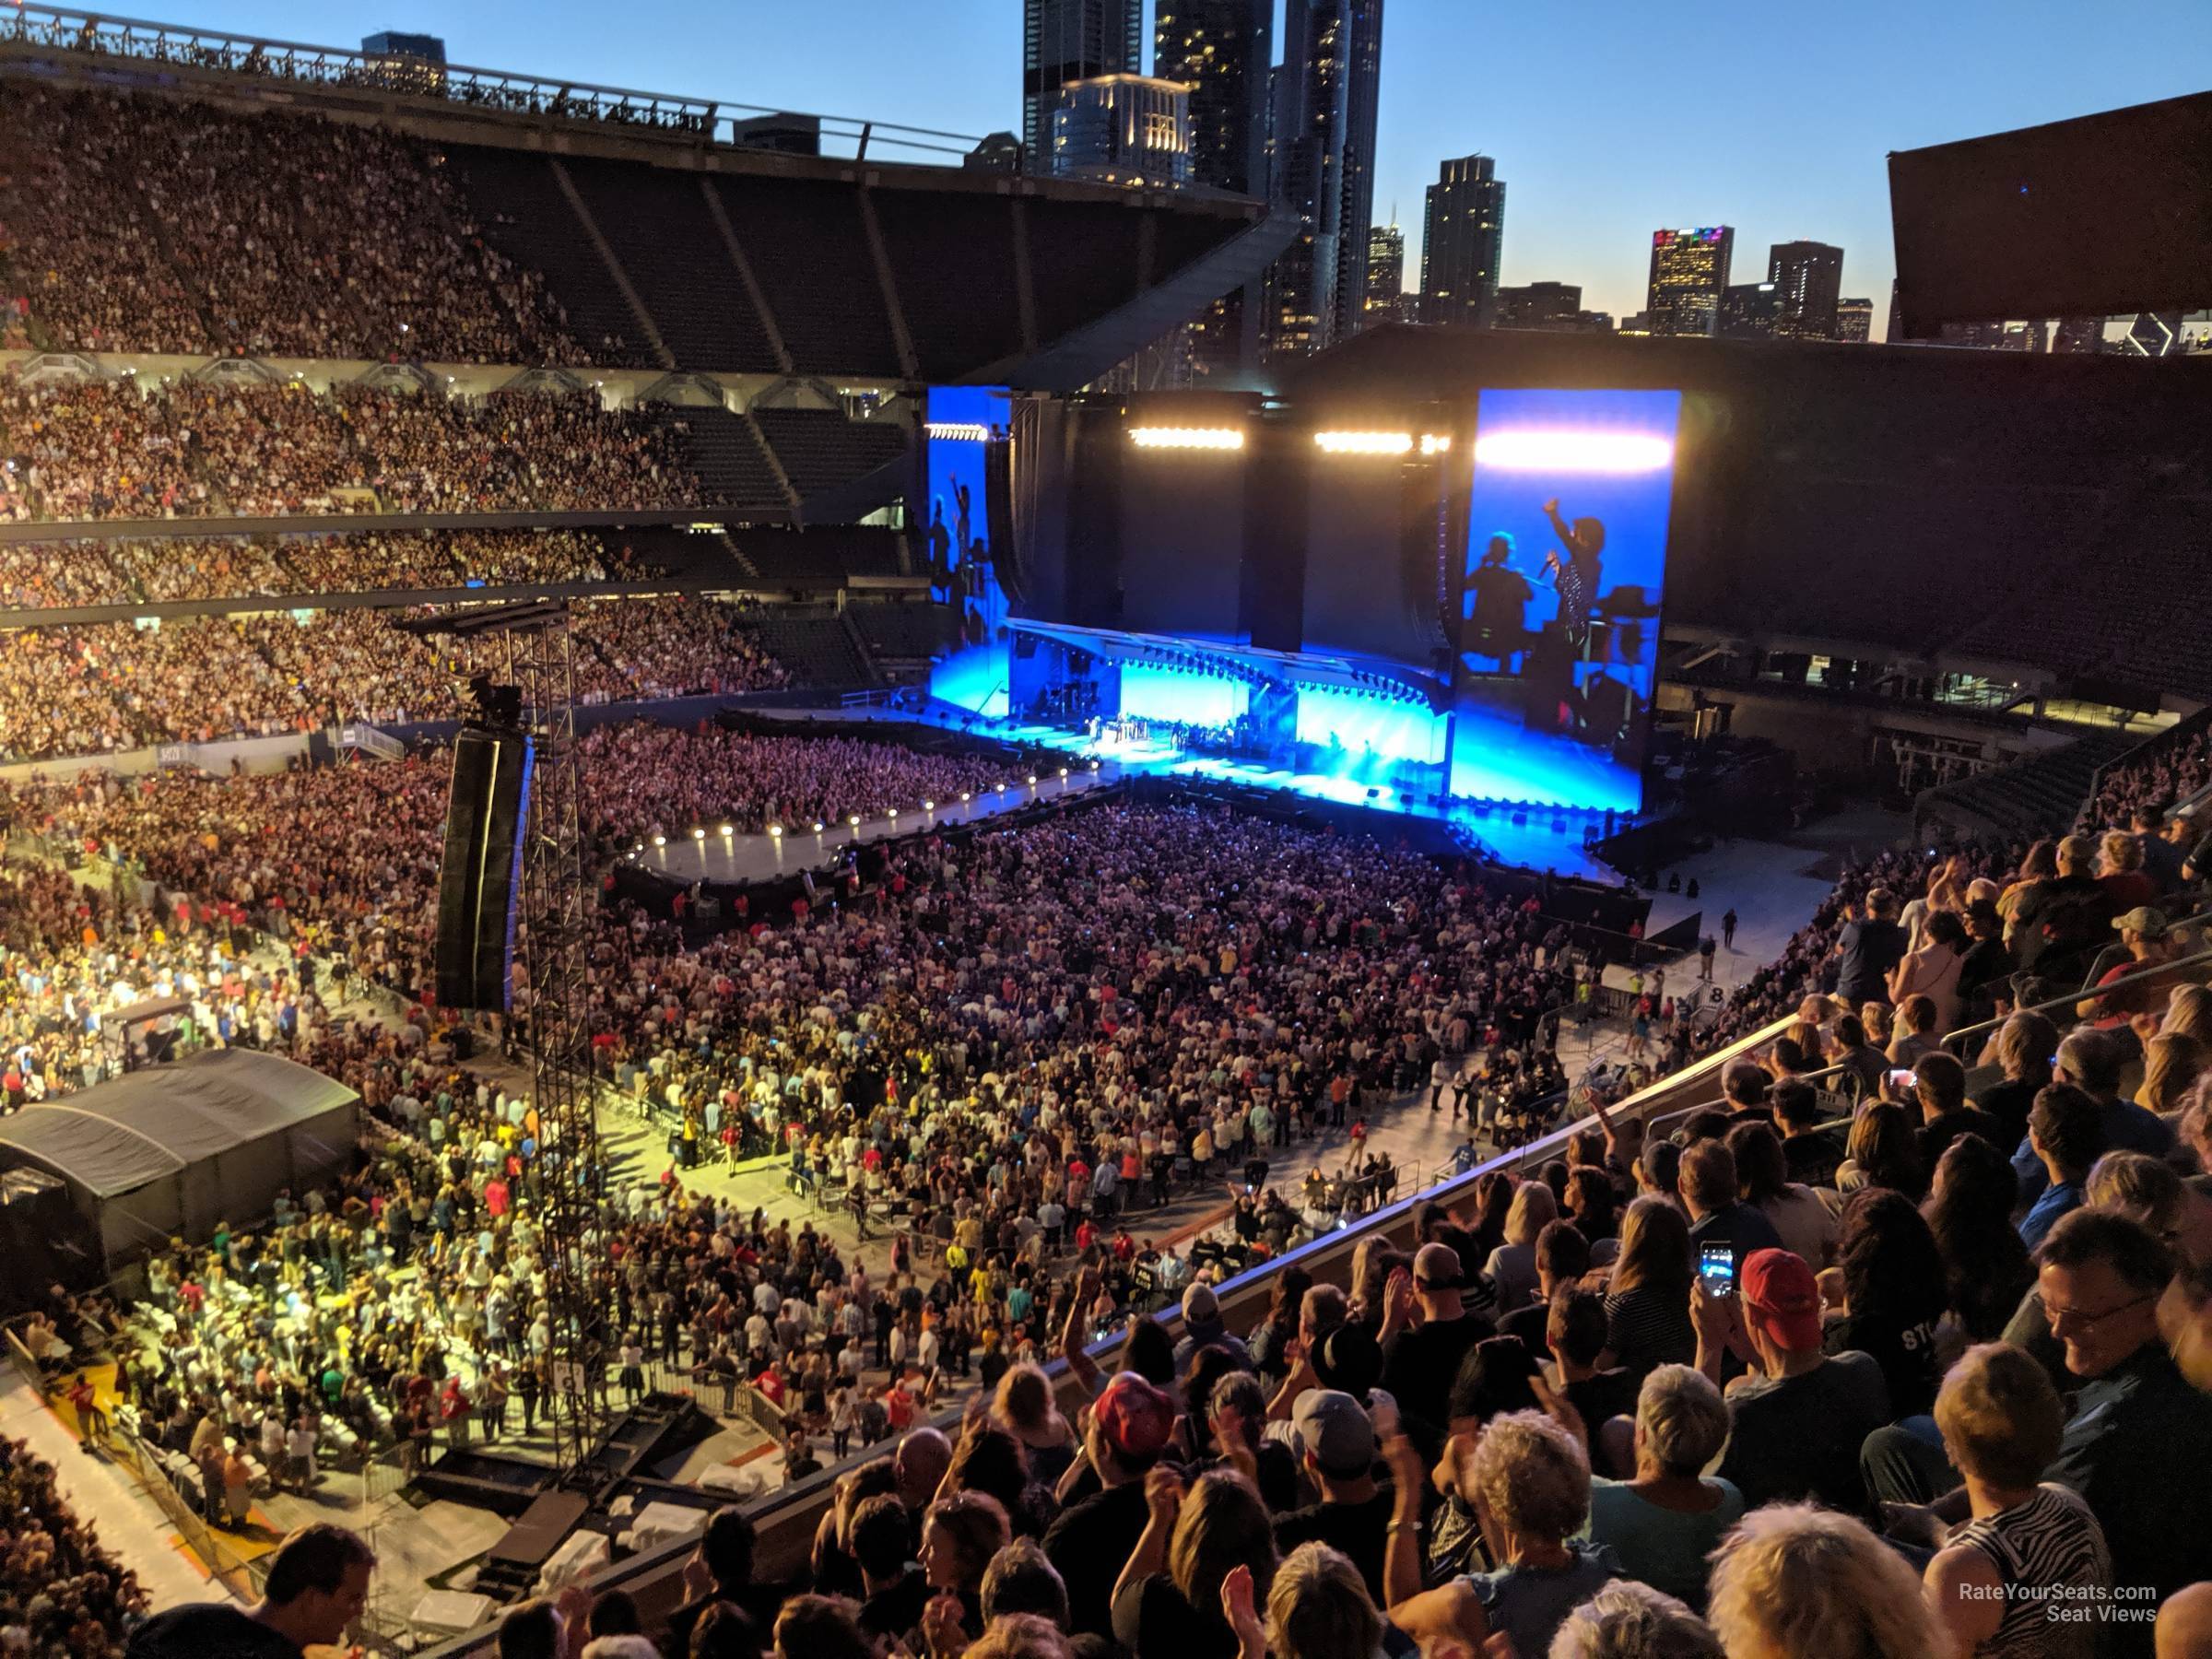 Section 311 at Soldier Field for Concerts